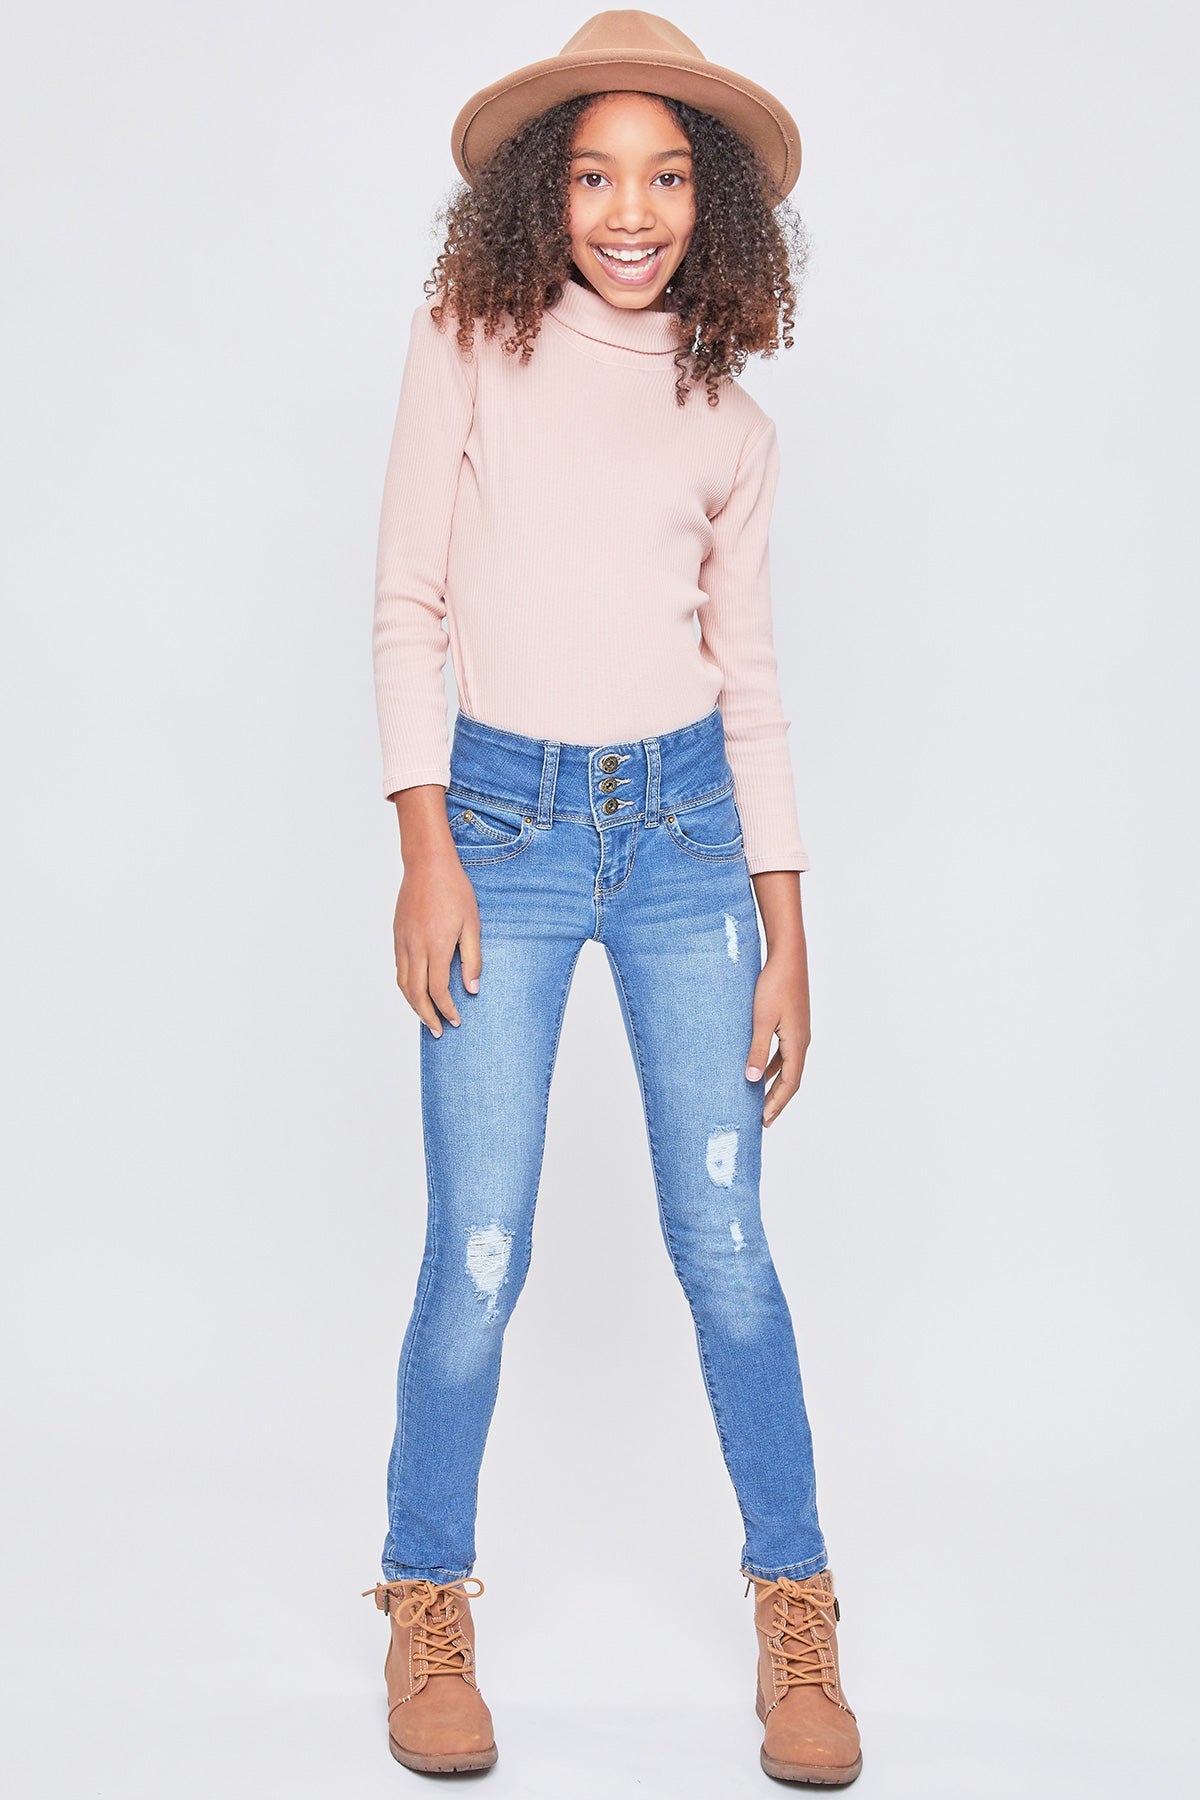 Missy Hyperdenim Super Stretchy High-Rise Flare Jean , Pack Of 6 from Royalty for Me